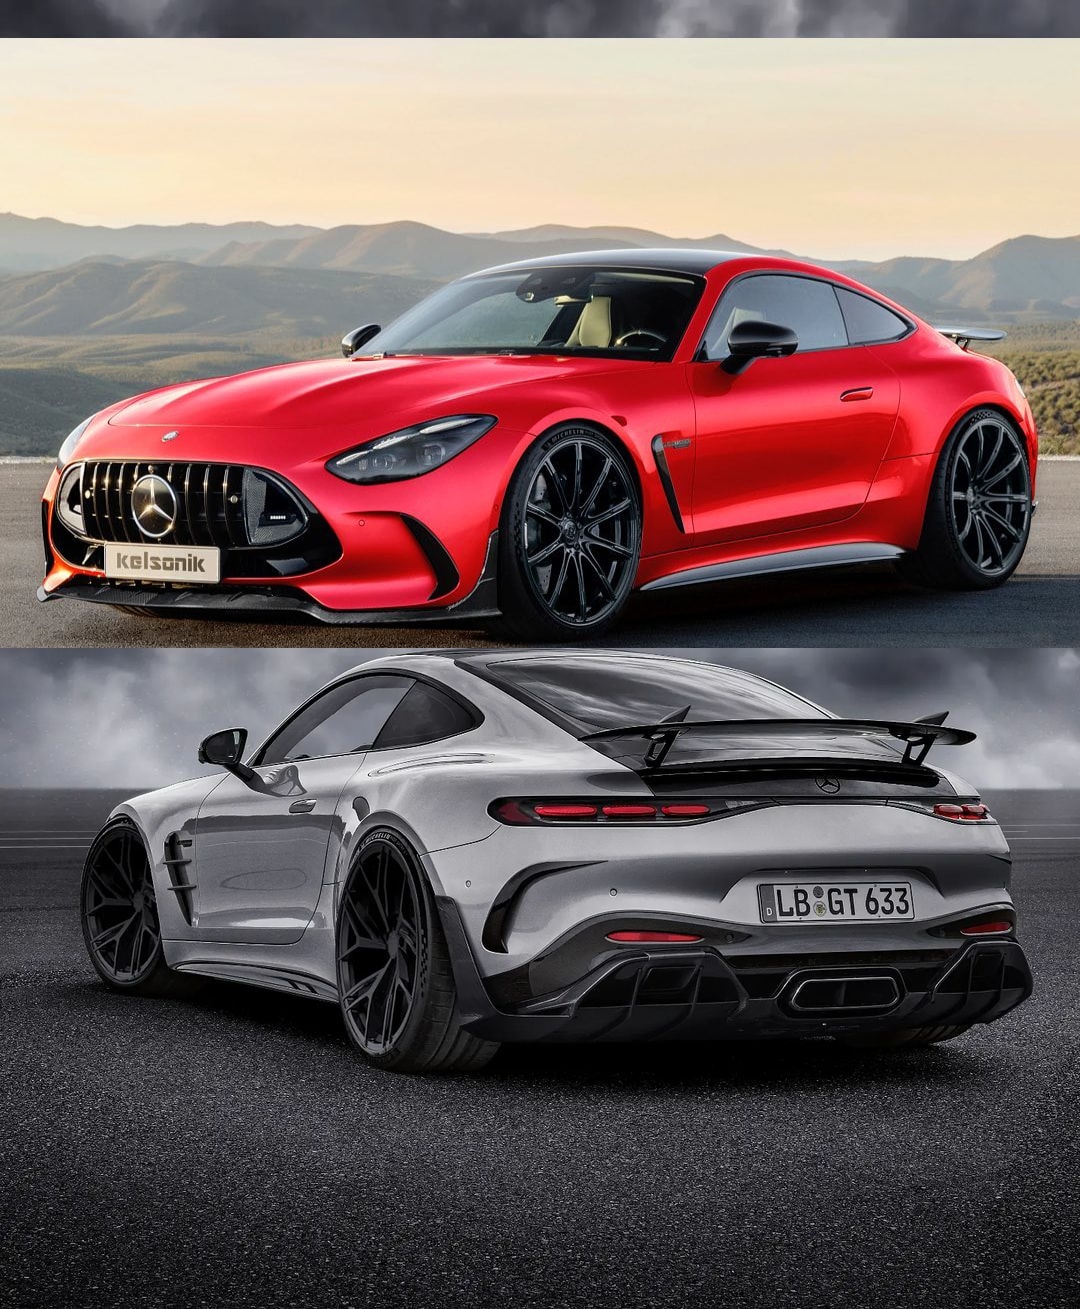 Mercedes-AMG GT – more pics in official AMG magazine